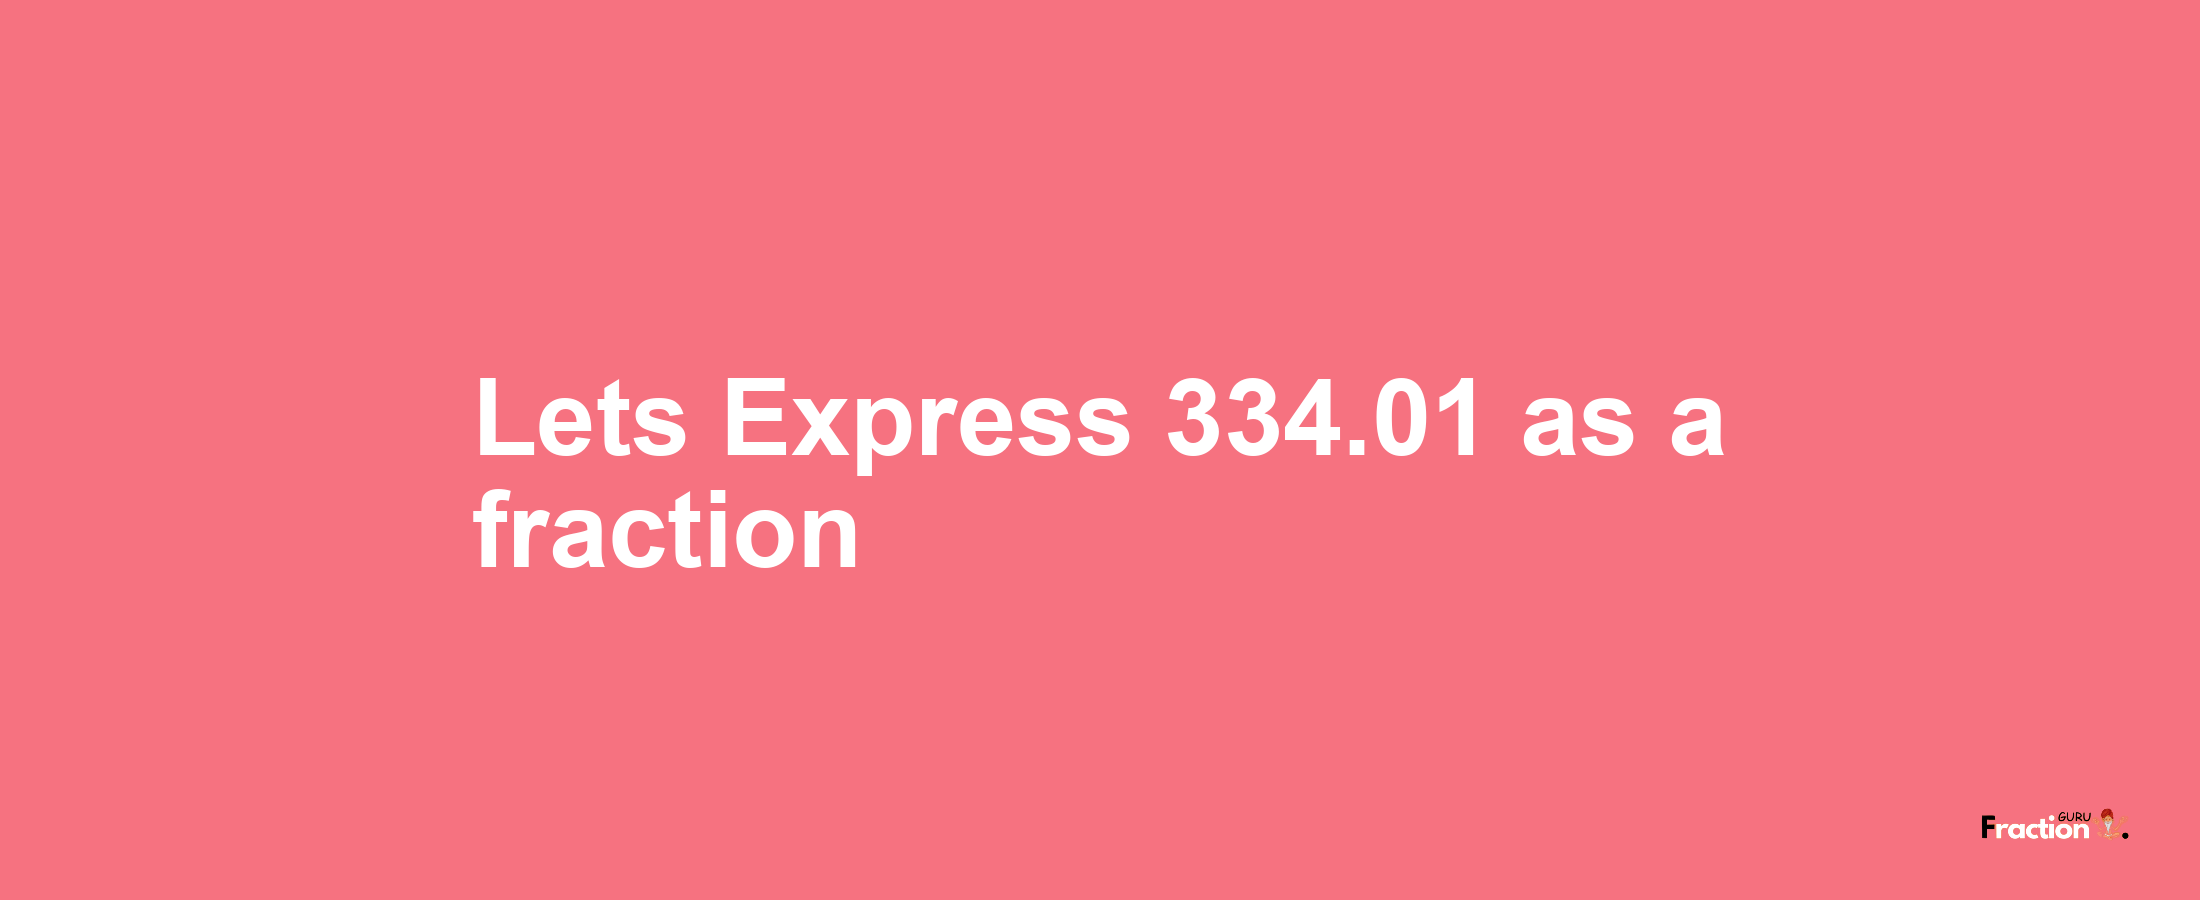 Lets Express 334.01 as afraction